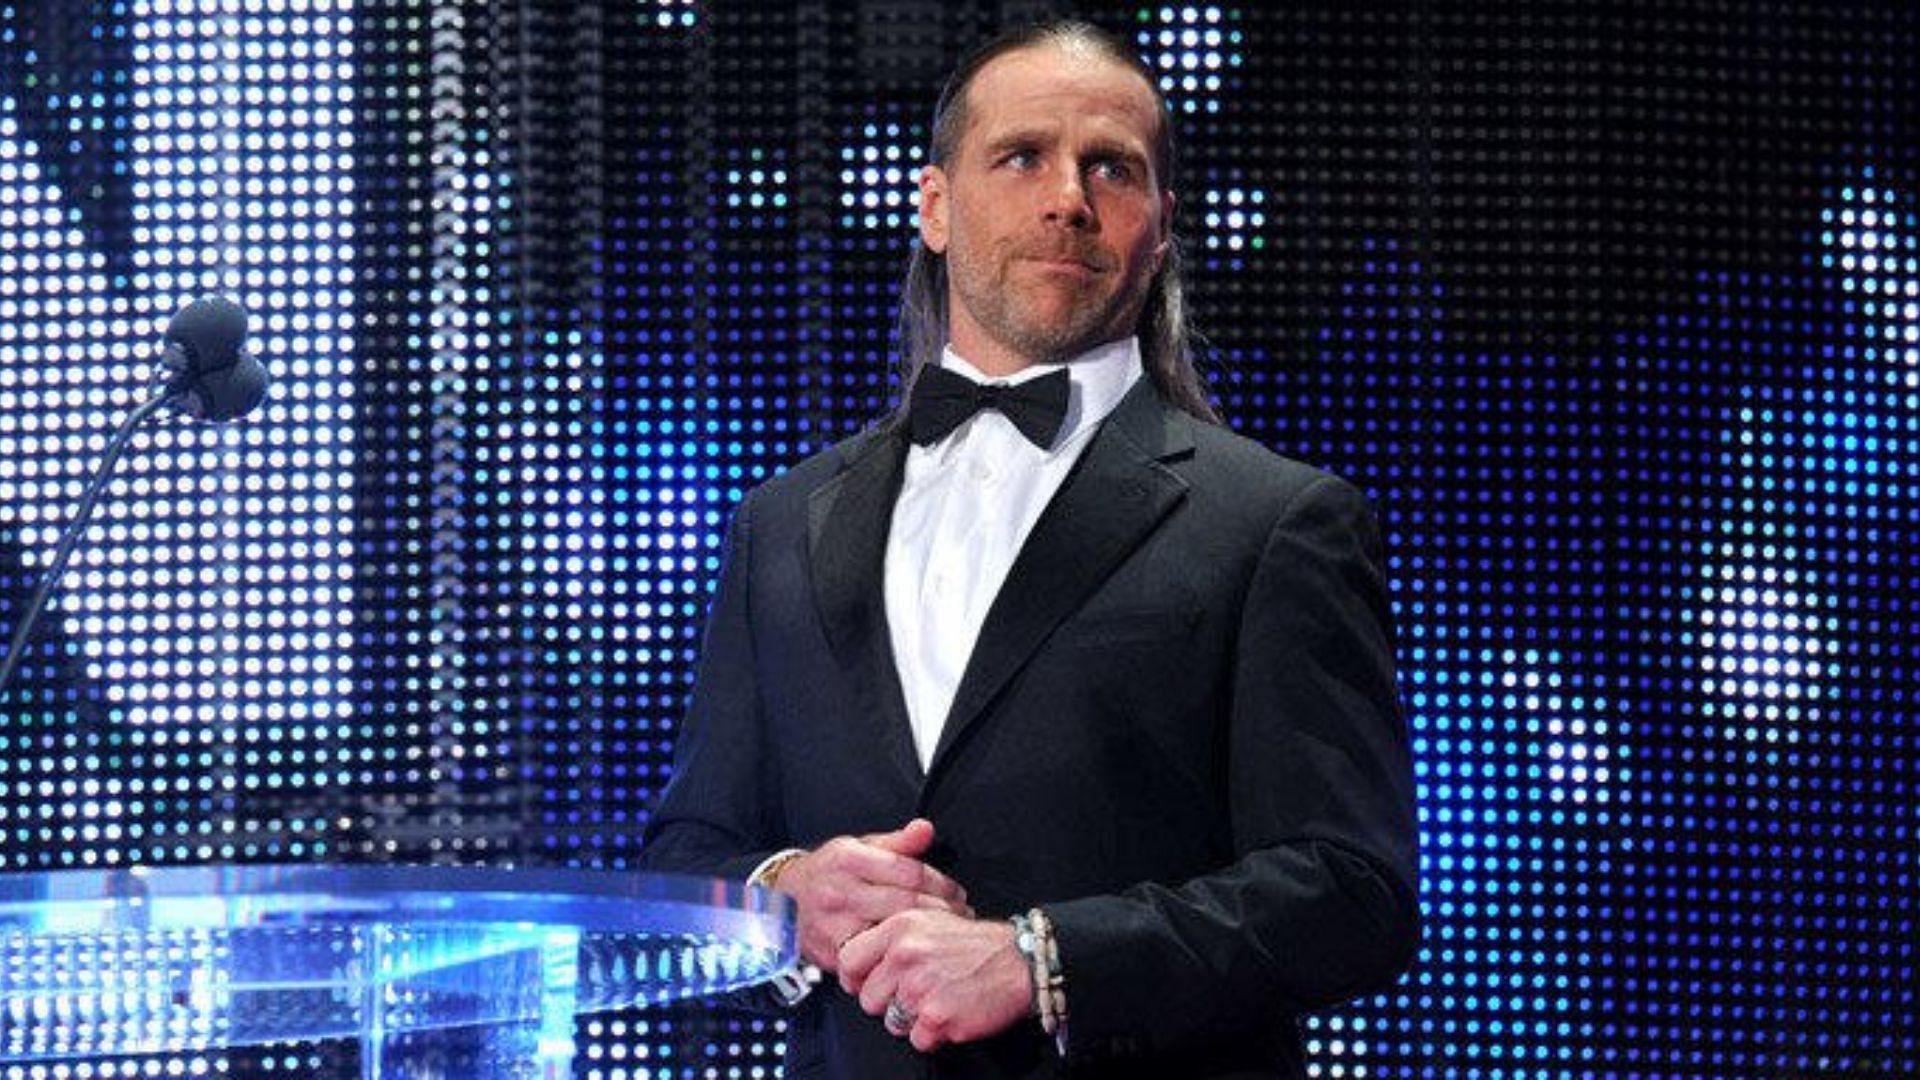 Shawn Michaels is a former WWE World Champion.